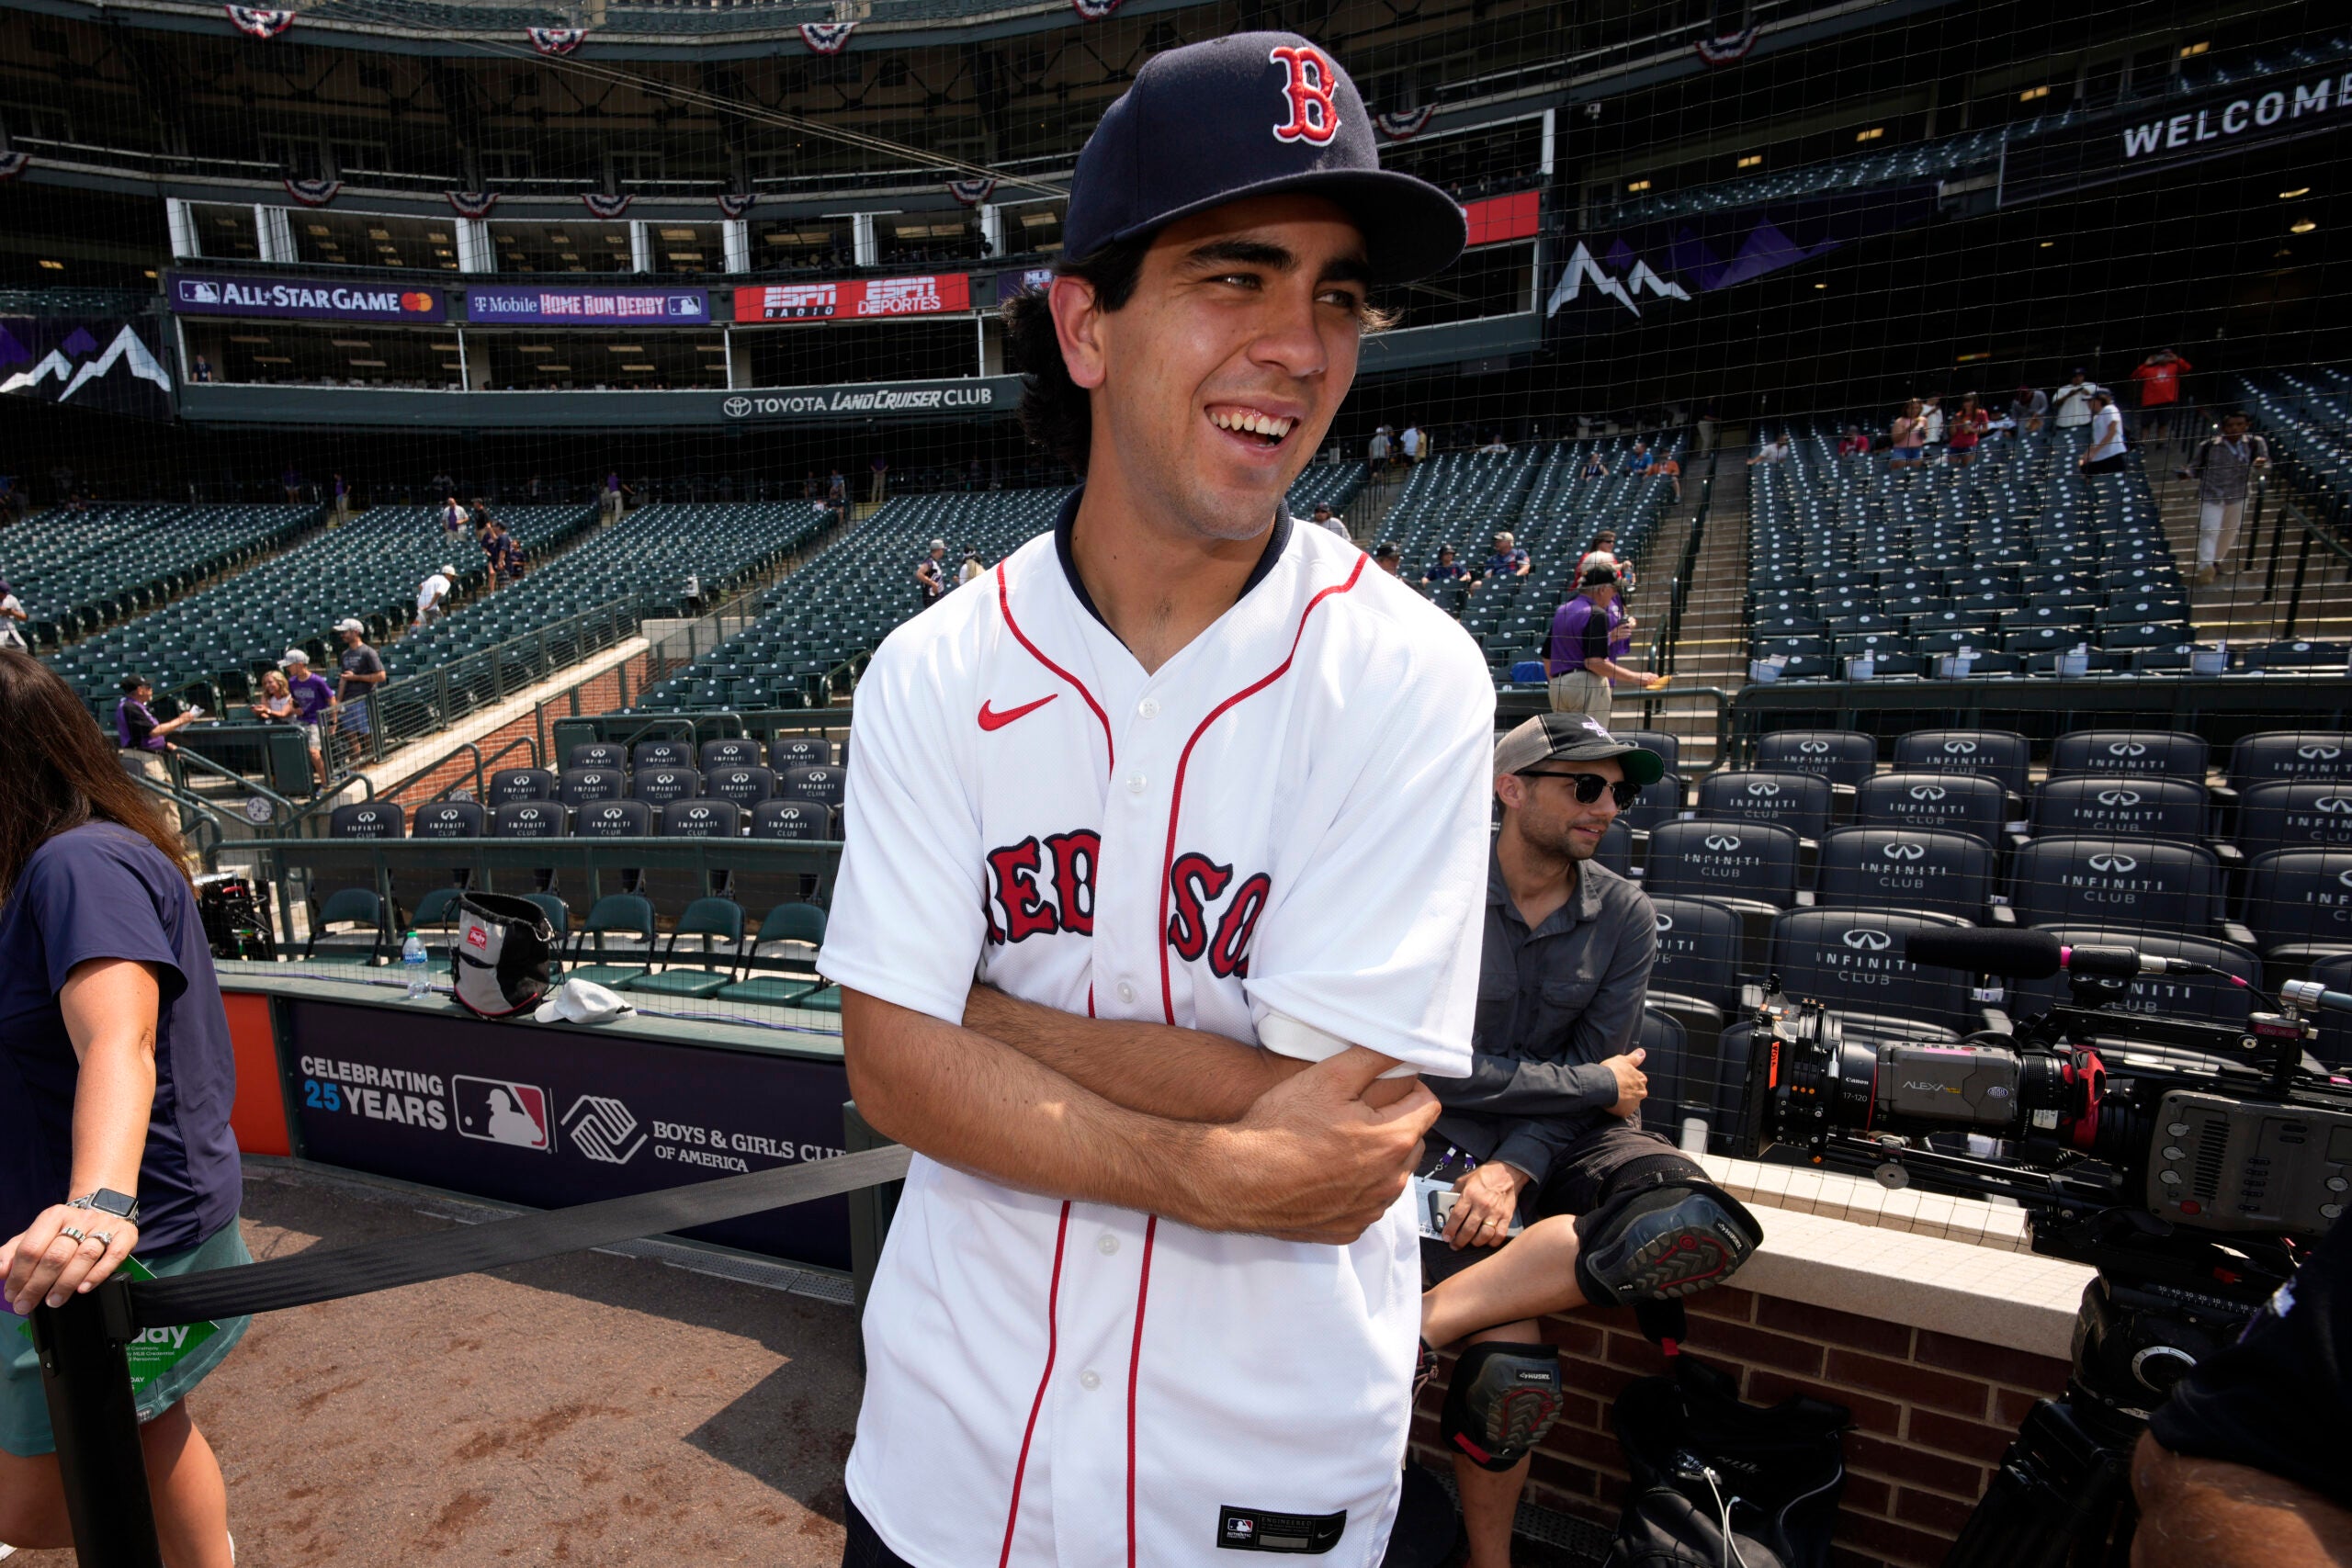 Watch Red Sox prospect Marcelo Mayer record his first professional hit